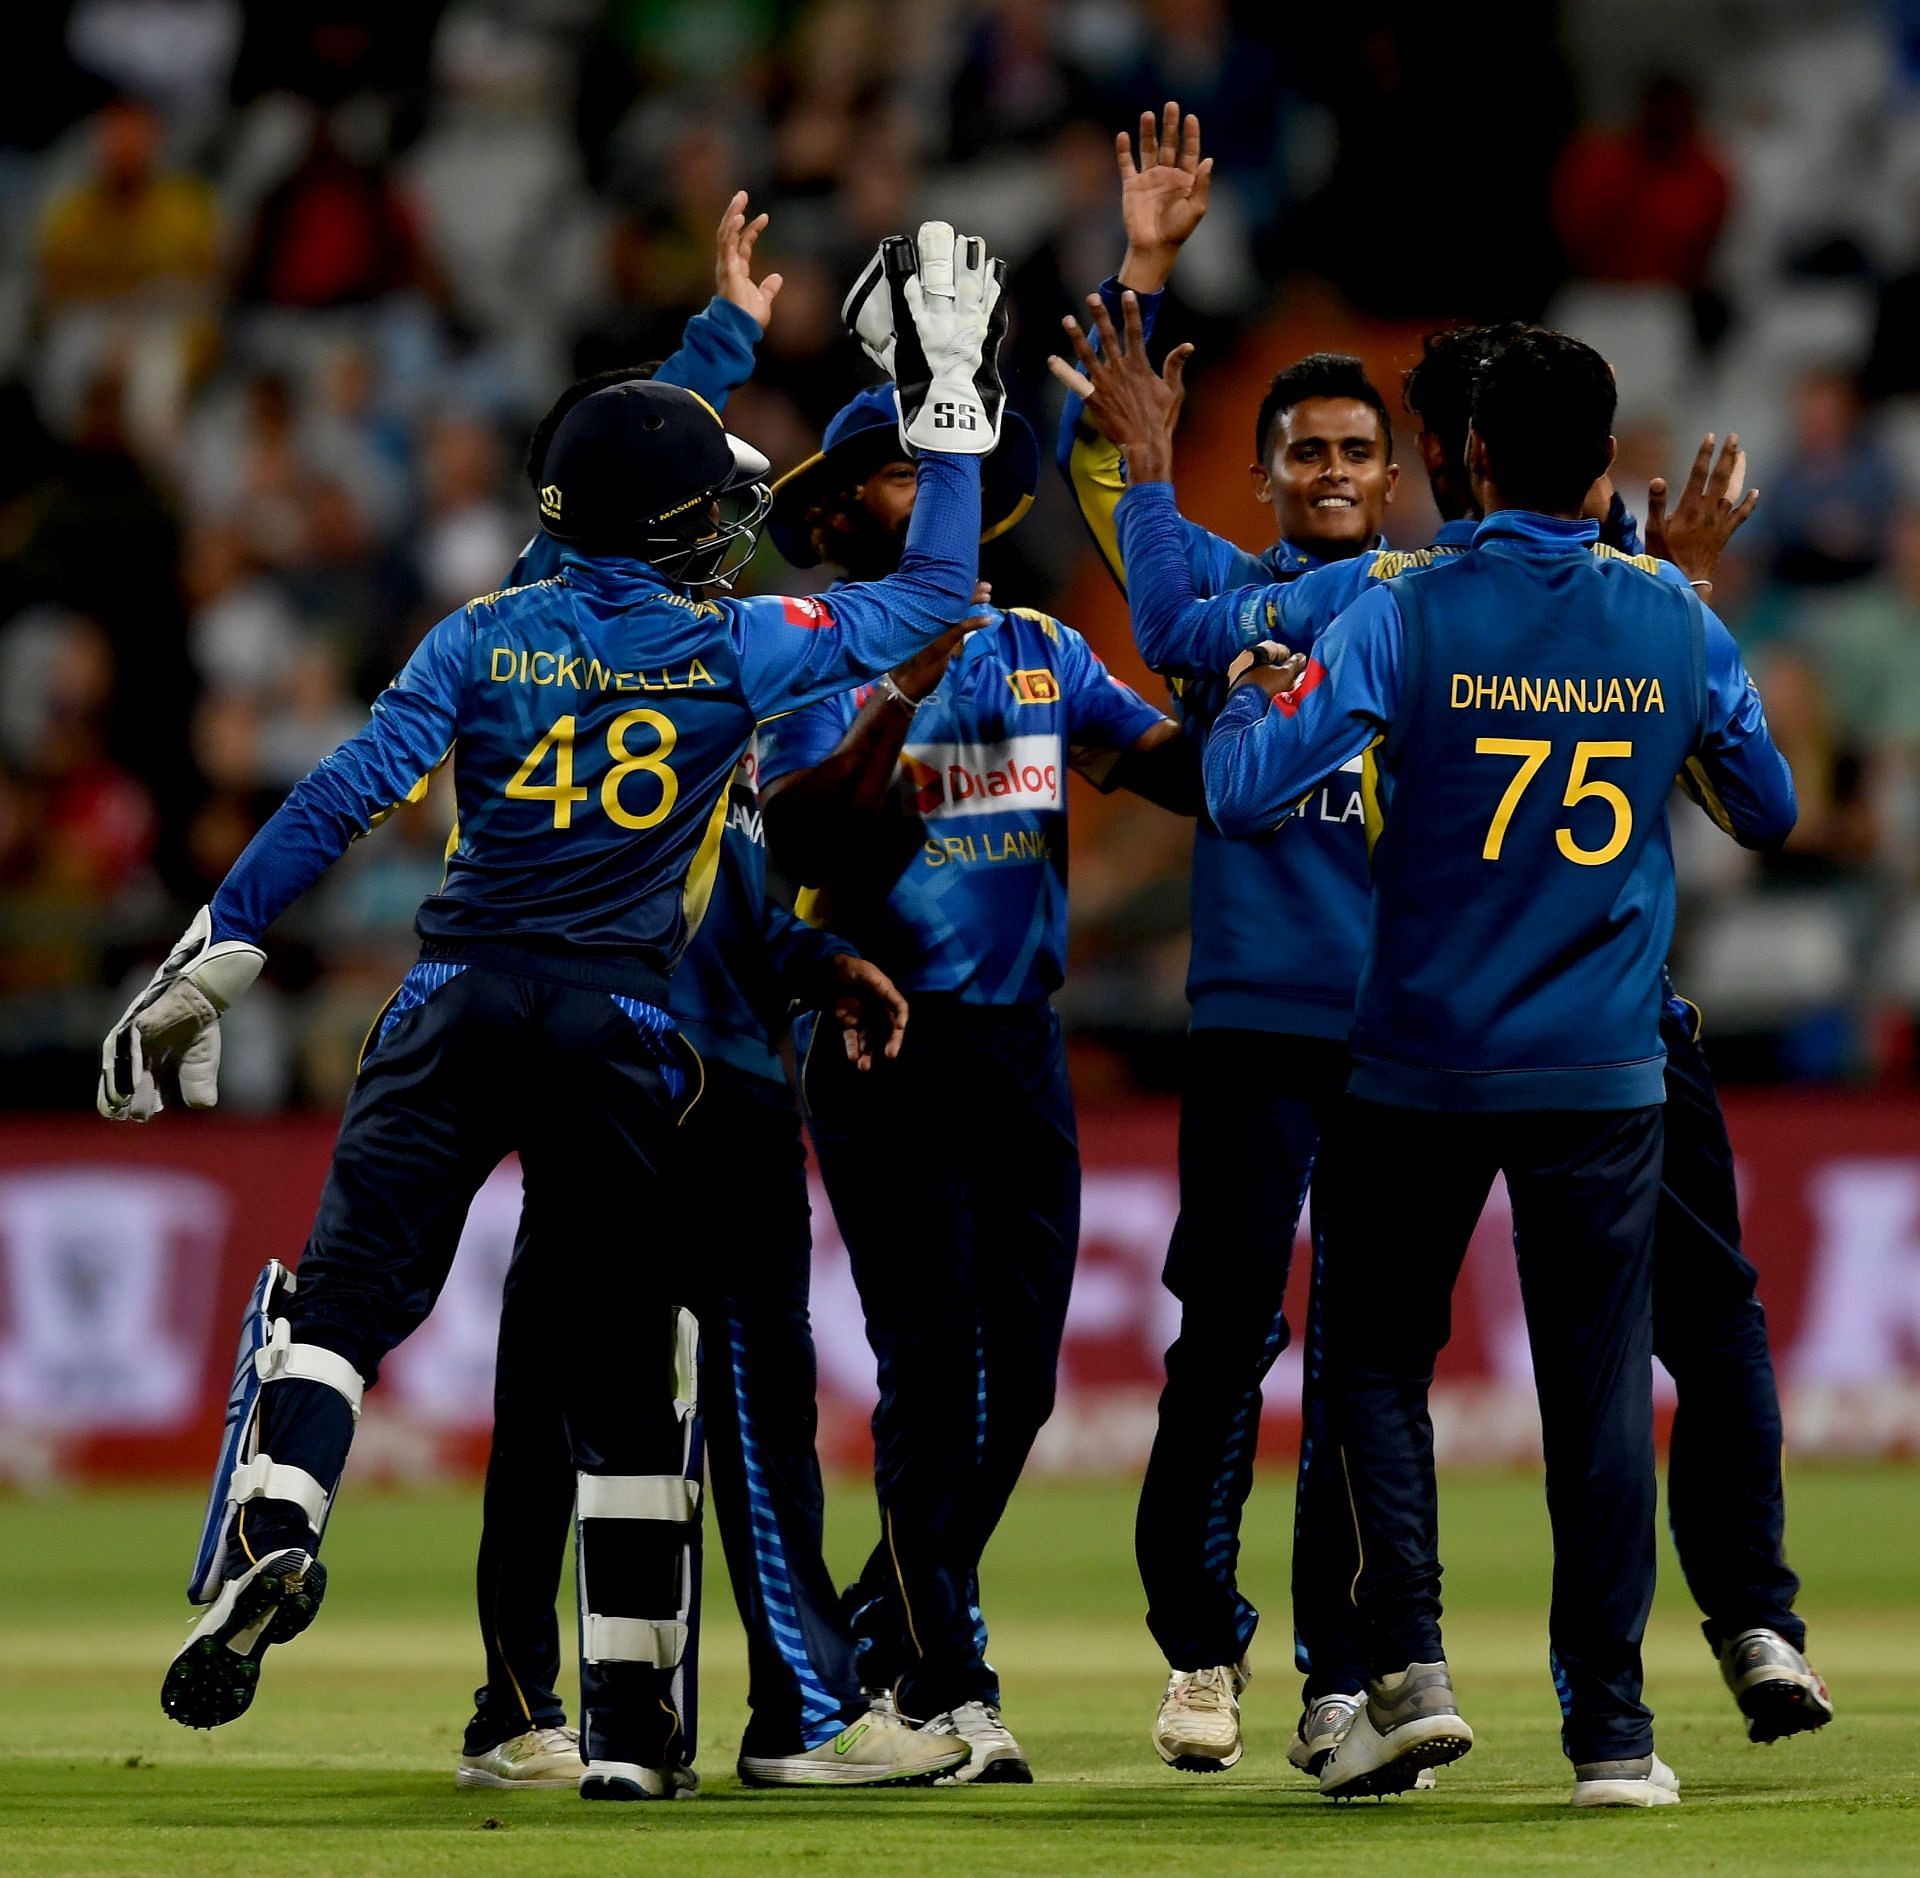 Sri Lanka A will hope to bounce back after losing the first game (Credit: Getty Images)